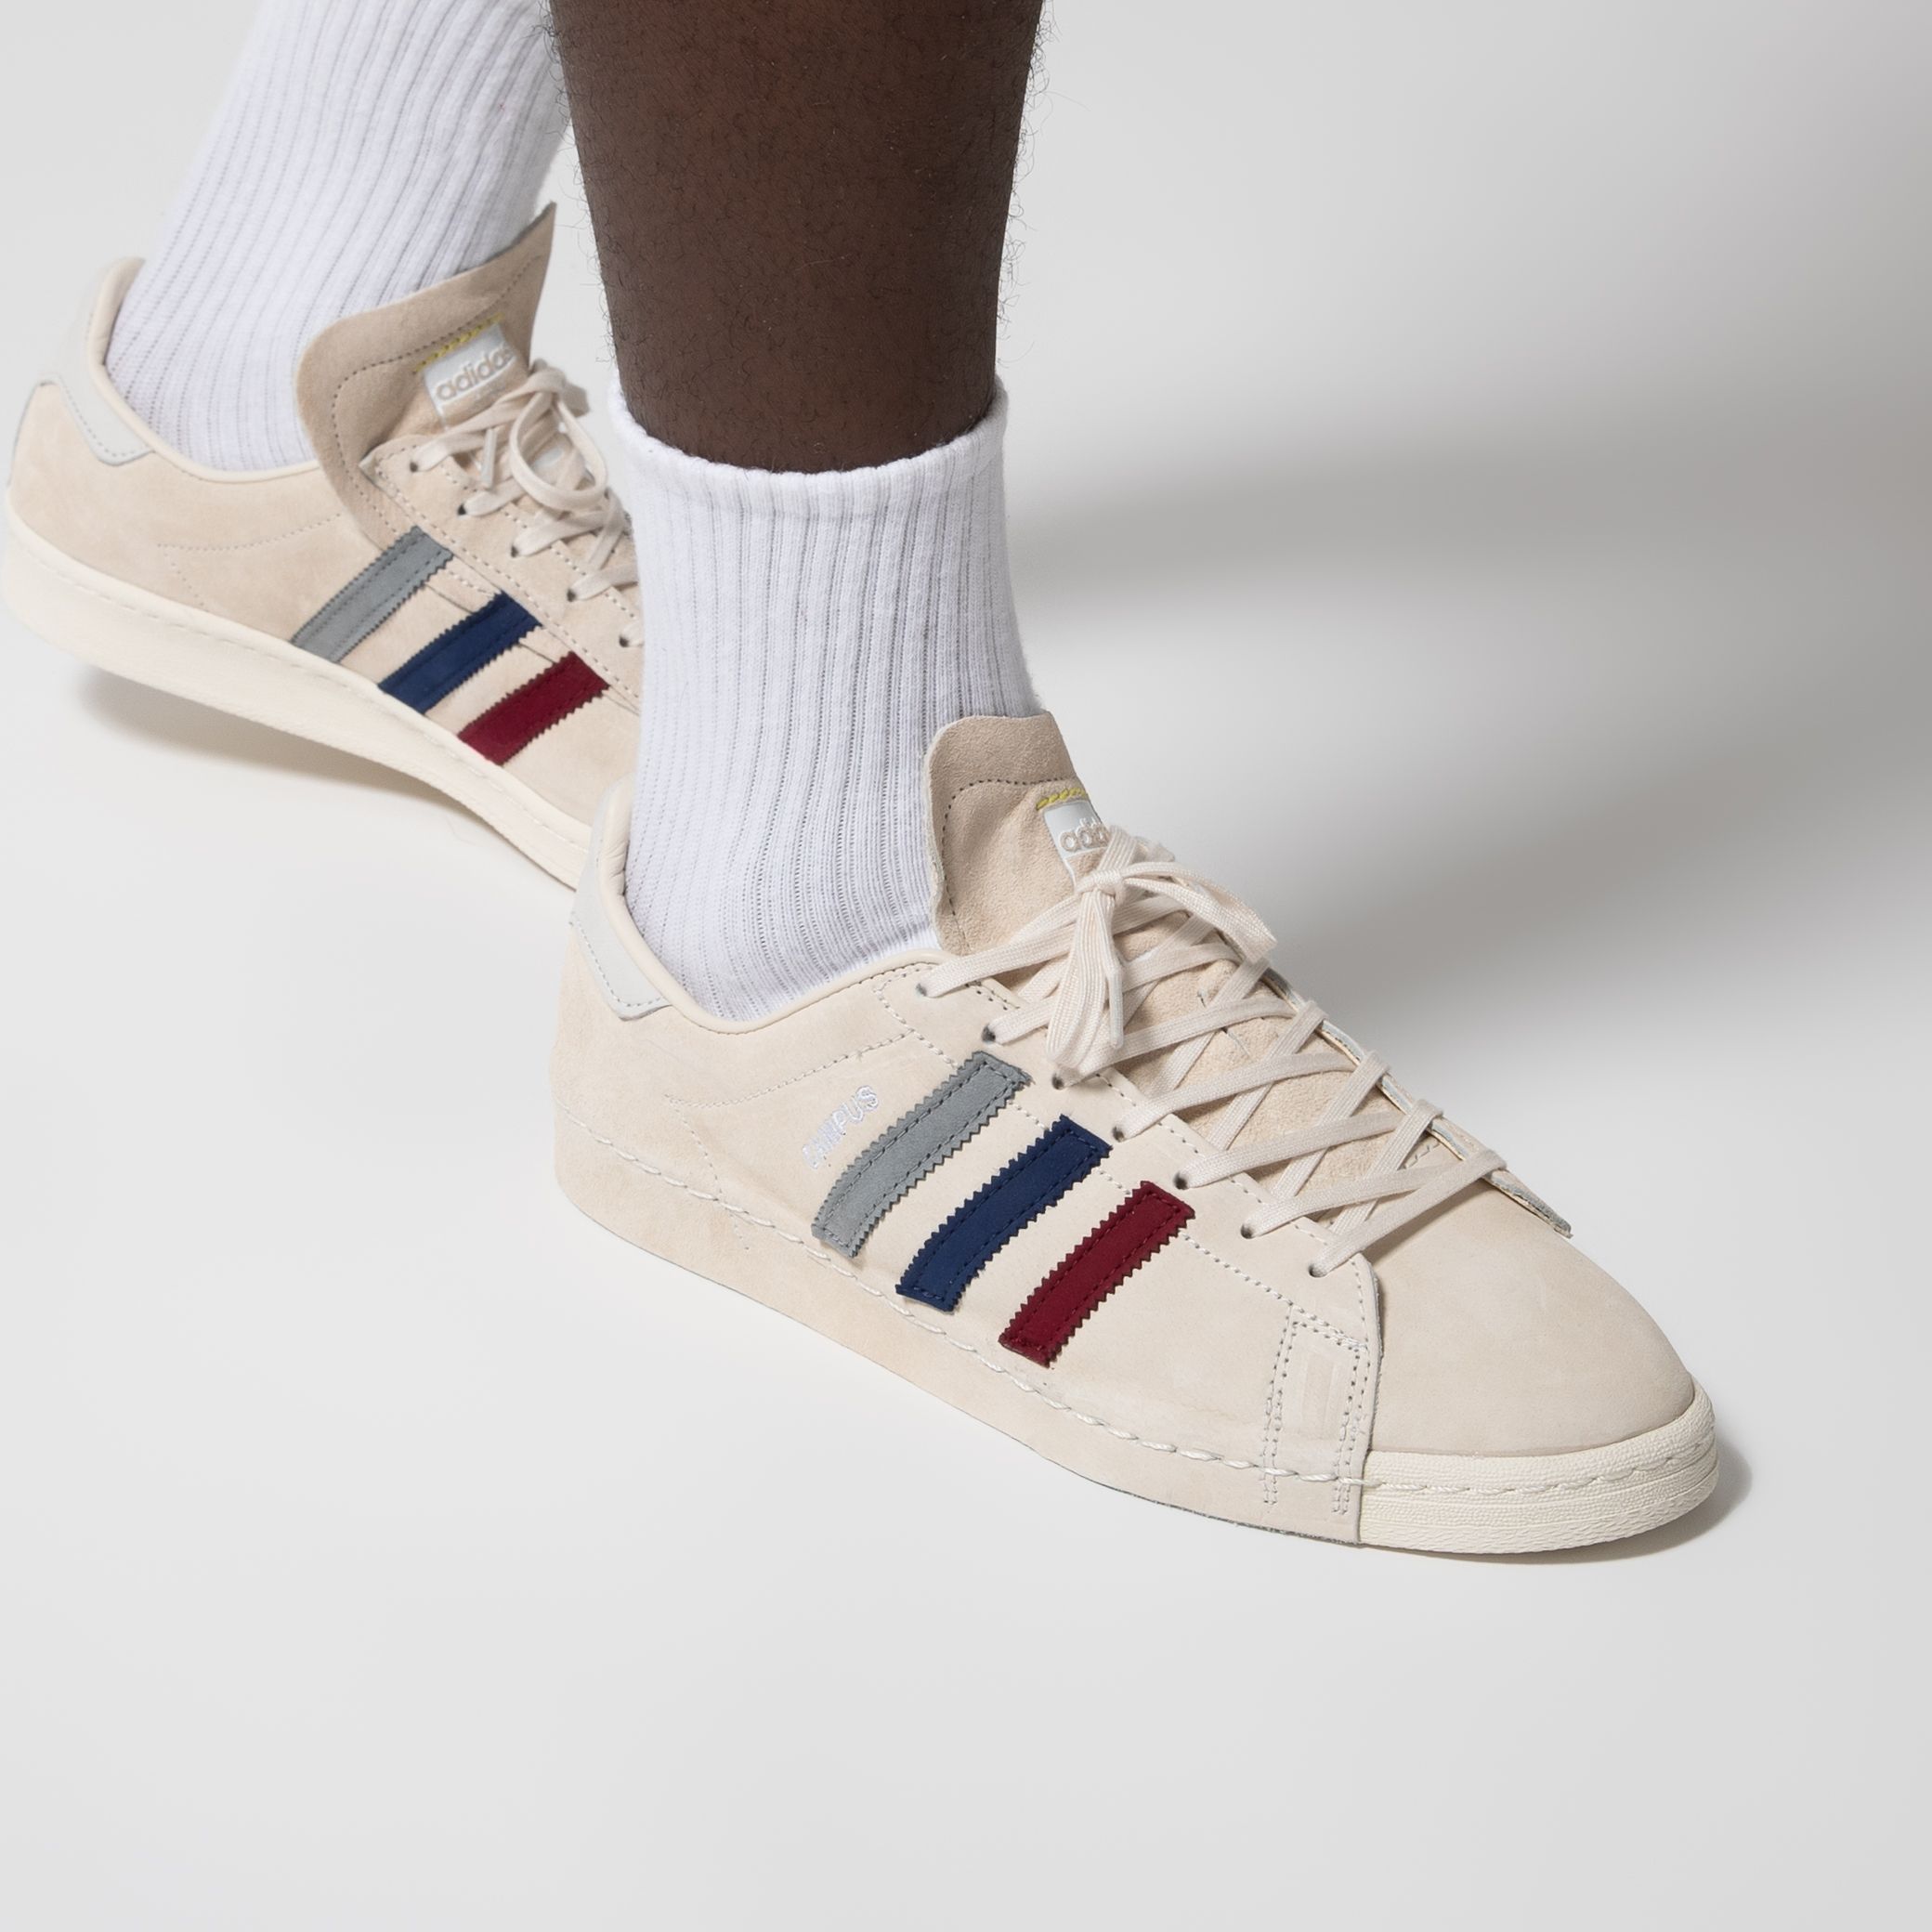 Anzai genio Nylon Titolo on Twitter: "ONLINE NOW 🔥 Recouture x Adidas Consortium Campus 80S  check it out ➡️ https://t.co/7JB2dOYFLc 🏃🏾UK 7 (40 2/3) - UK 11 (46)  Recouture is an experimental sneaker repair and